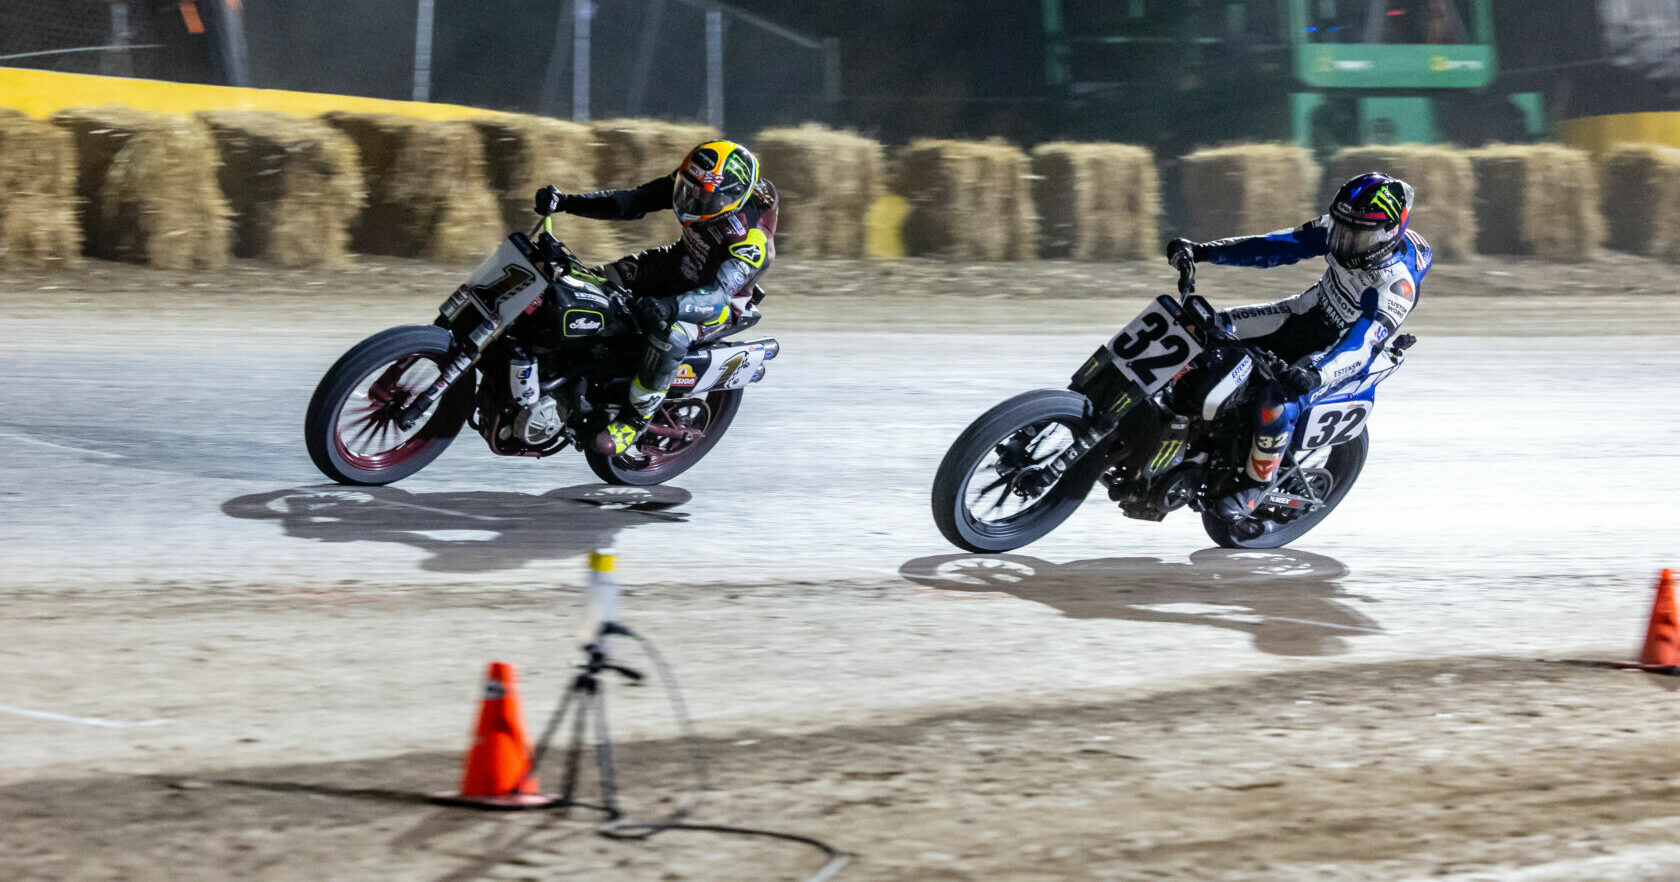 Jared Mees (1) and Dallas Daniels (32) will continue their battle for AFT SuperTwins supremacy May 6 at the Ventura Short Track, in California. Photo by Tim Lester, courtesy AFT.